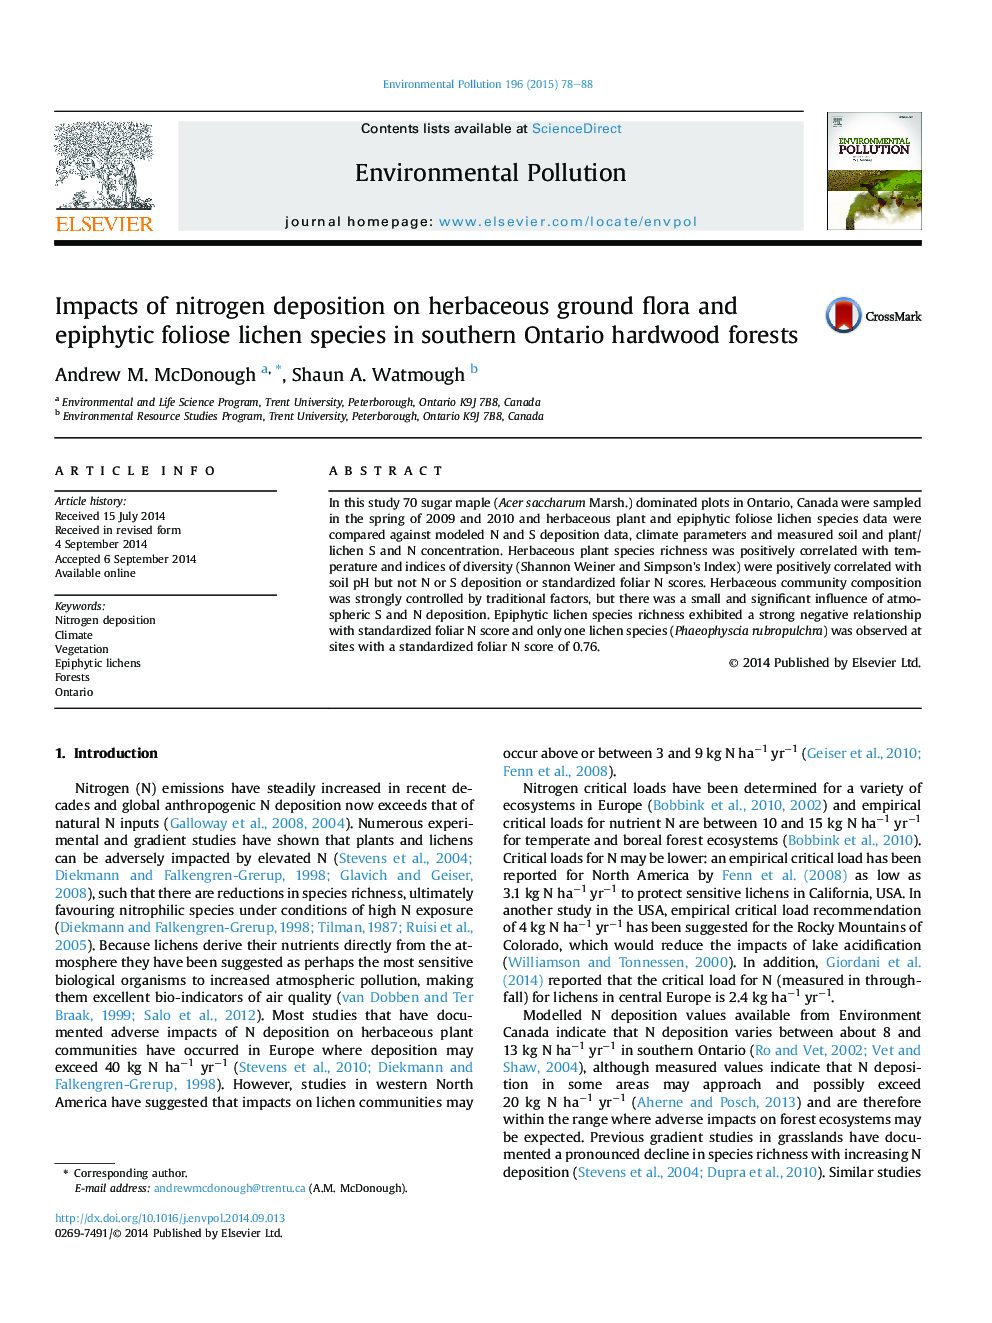 Impacts of nitrogen deposition on herbaceous ground flora and epiphytic foliose lichen species in southern Ontario hardwood forests